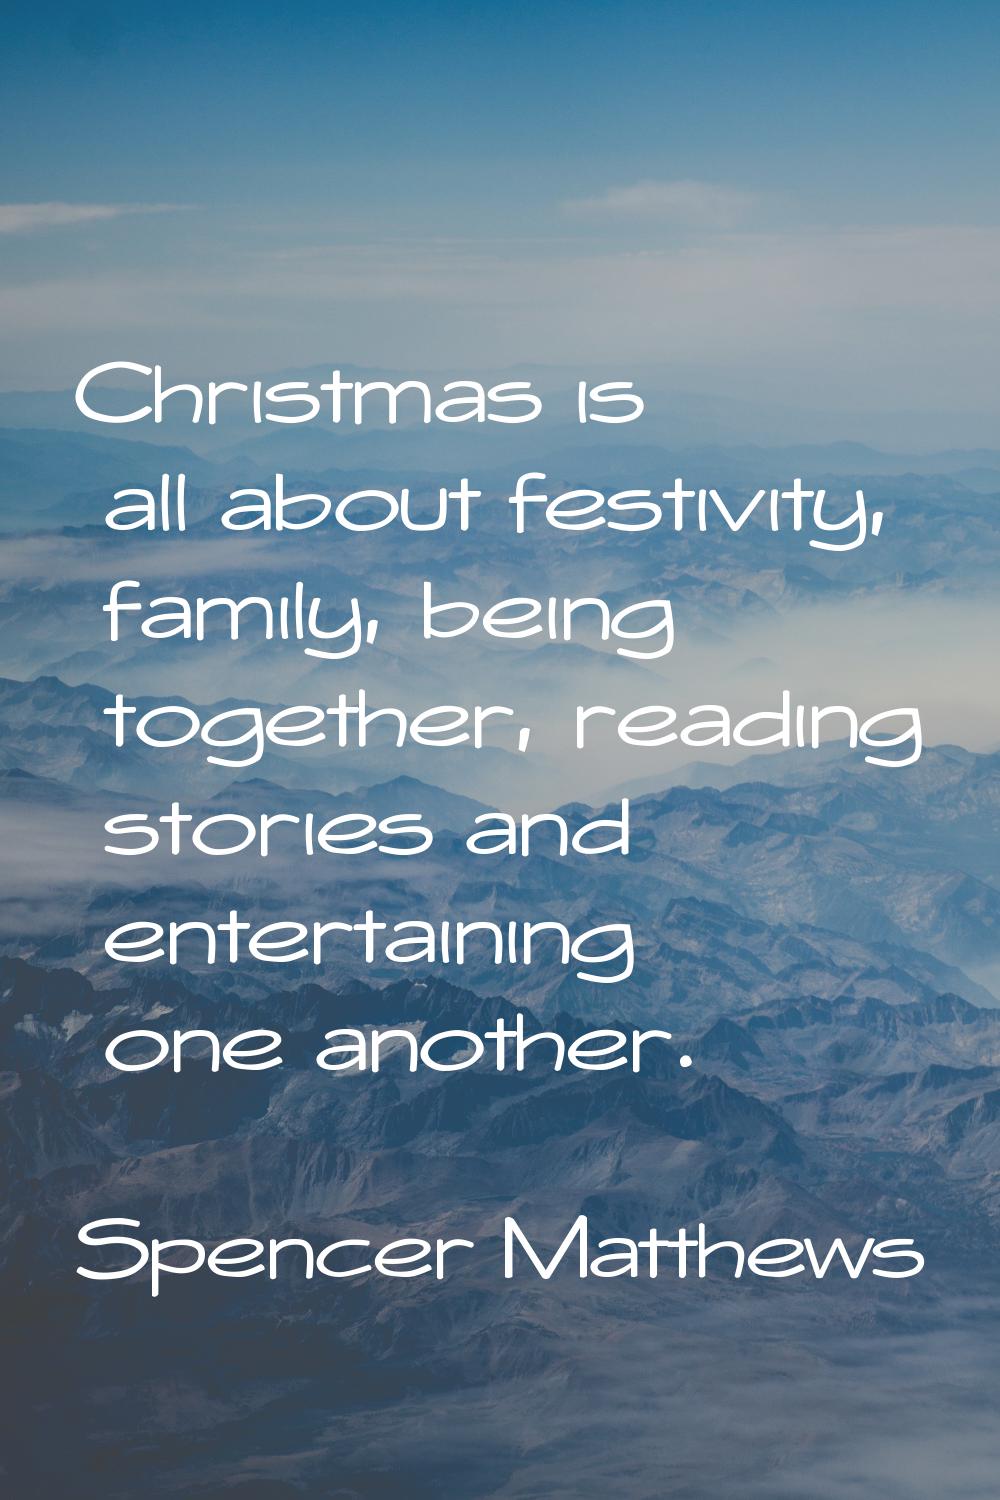 Christmas is all about festivity, family, being together, reading stories and entertaining one anot